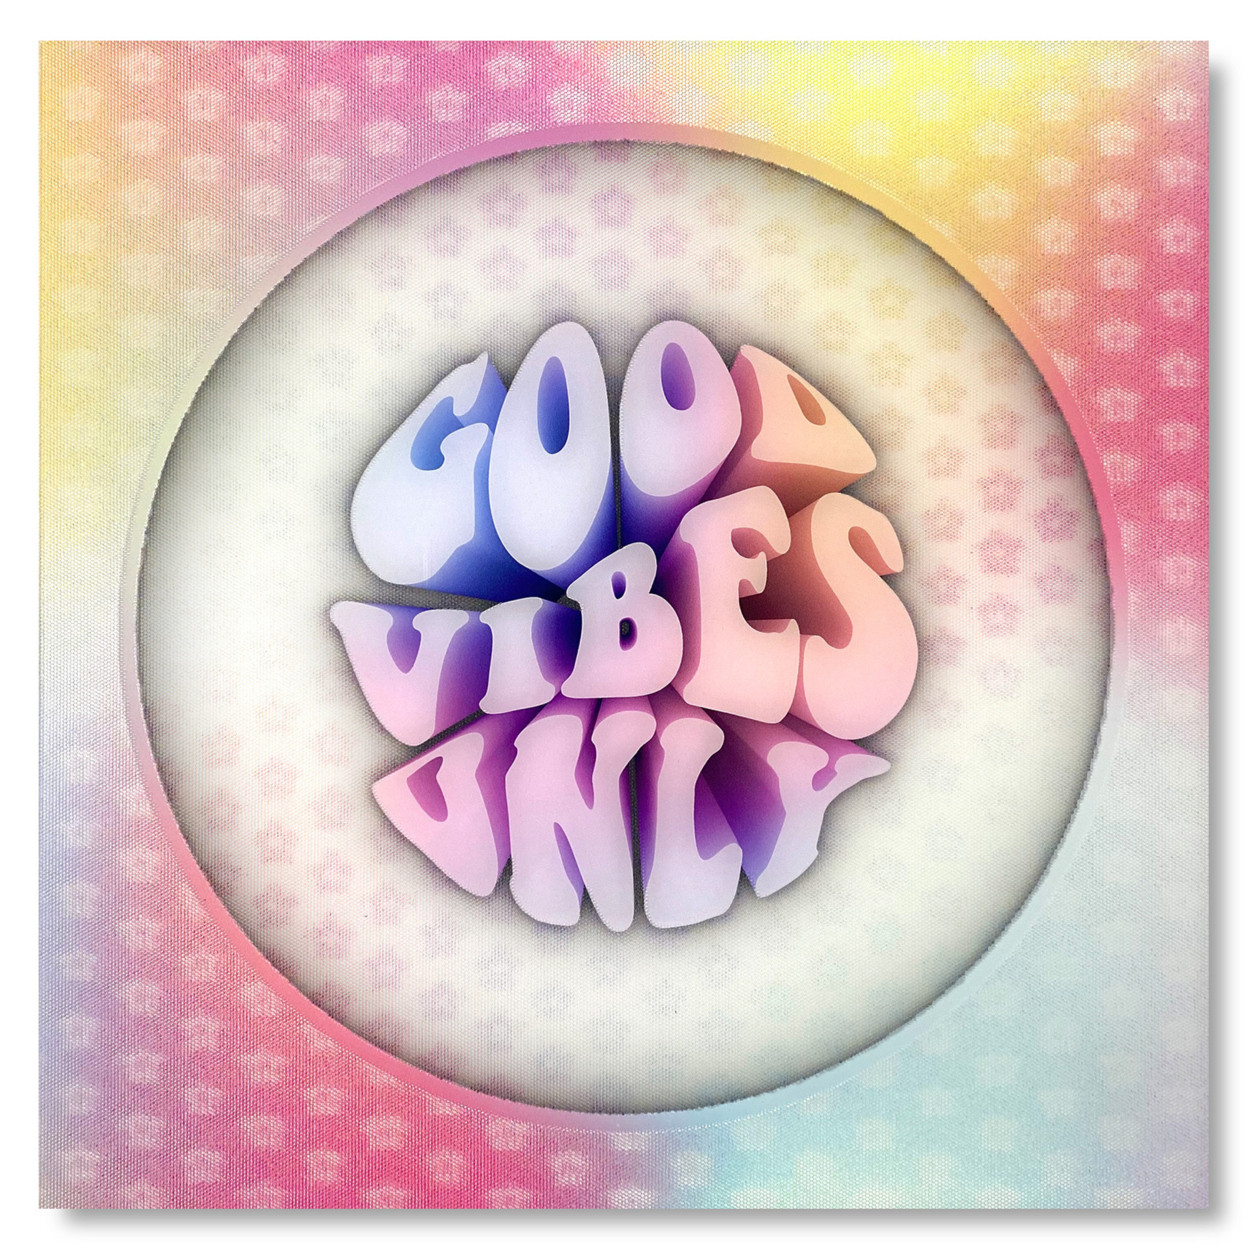 5D Multi-Dimensional Wall Art - Custom Made Good Vibes Wall Art Print On Strong Polycarbonate Panel W/ Vibrant Colors By Matashi (6x6 In)